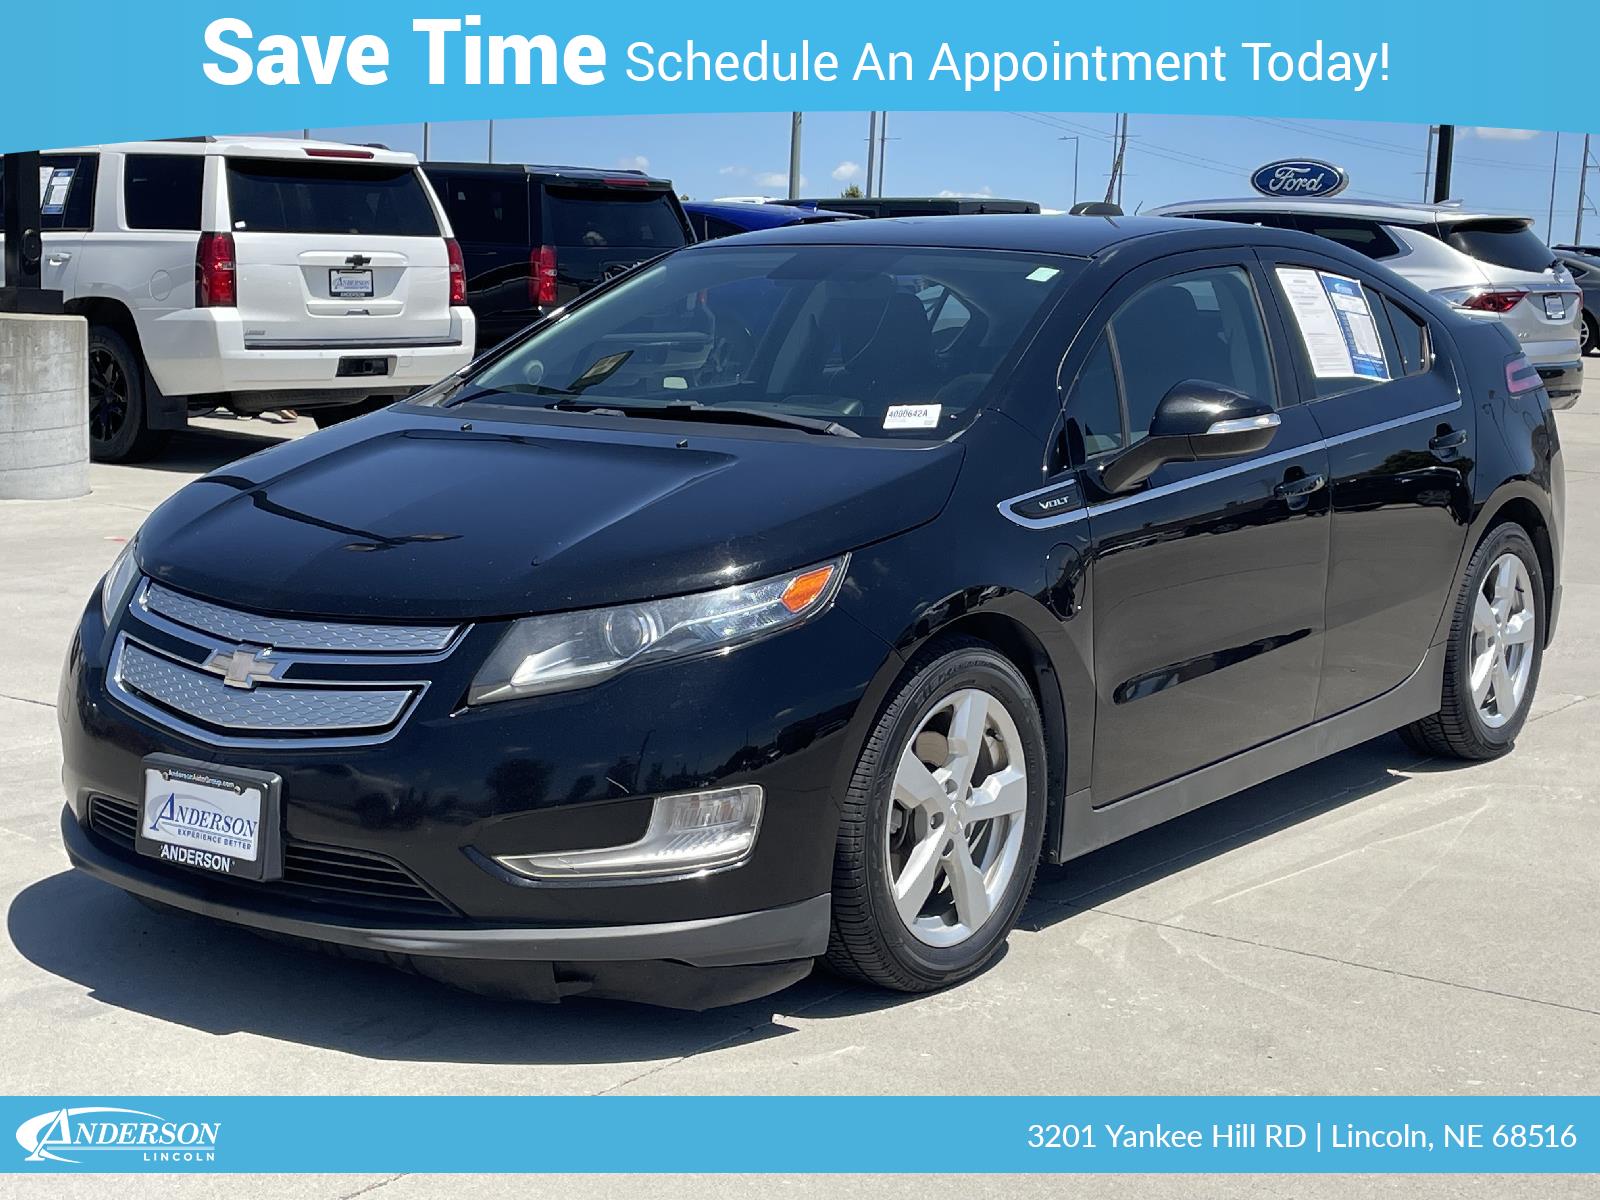 Used 2015 Chevrolet Volt  Stock: 4000642A